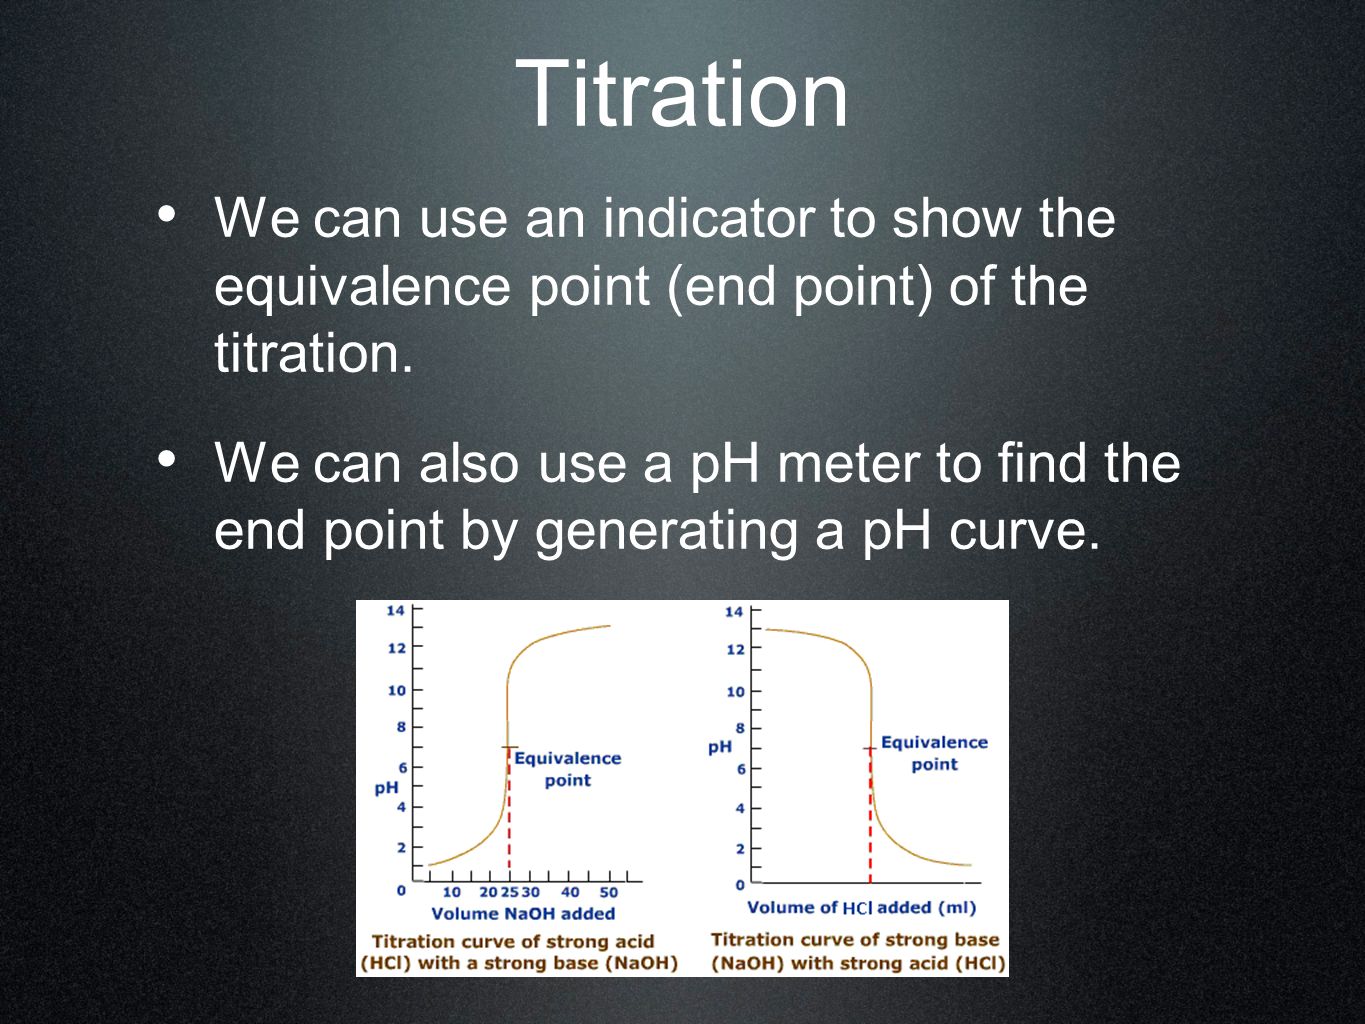 Titration We can use an indicator to show the equivalence point (end point) of the titration.